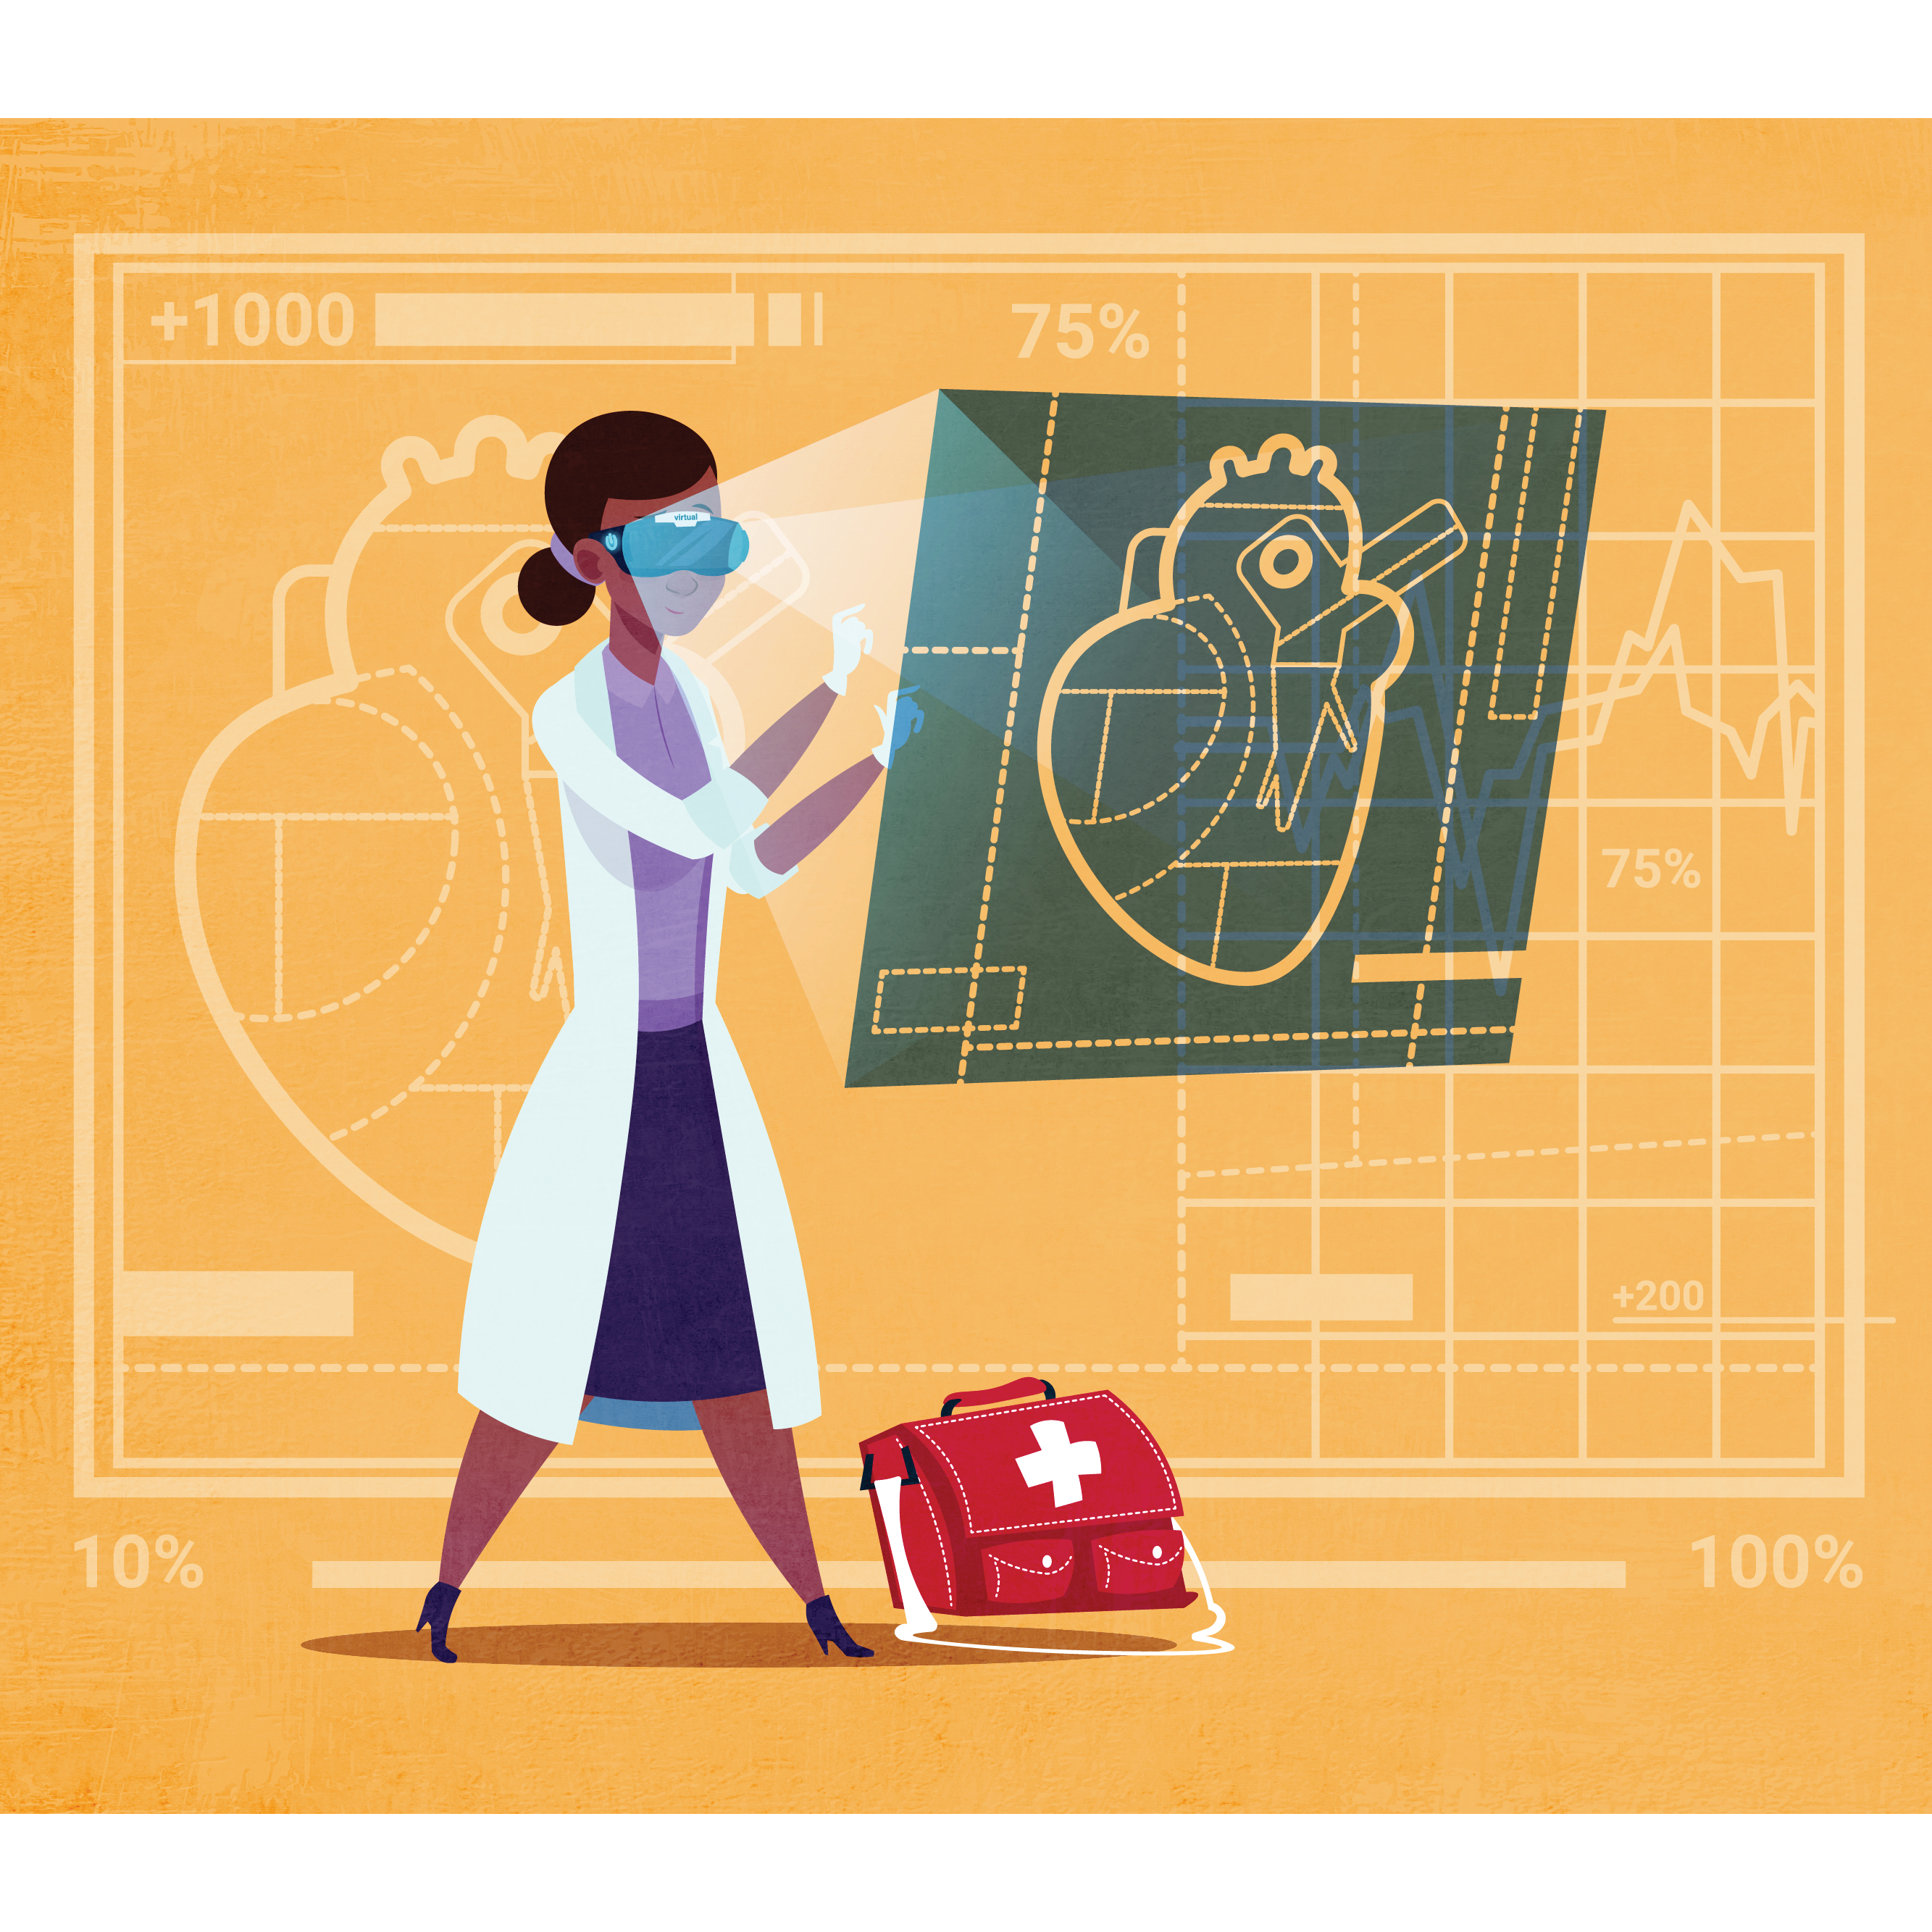 An illustration shows a clinician looking at a diagram of a heart.